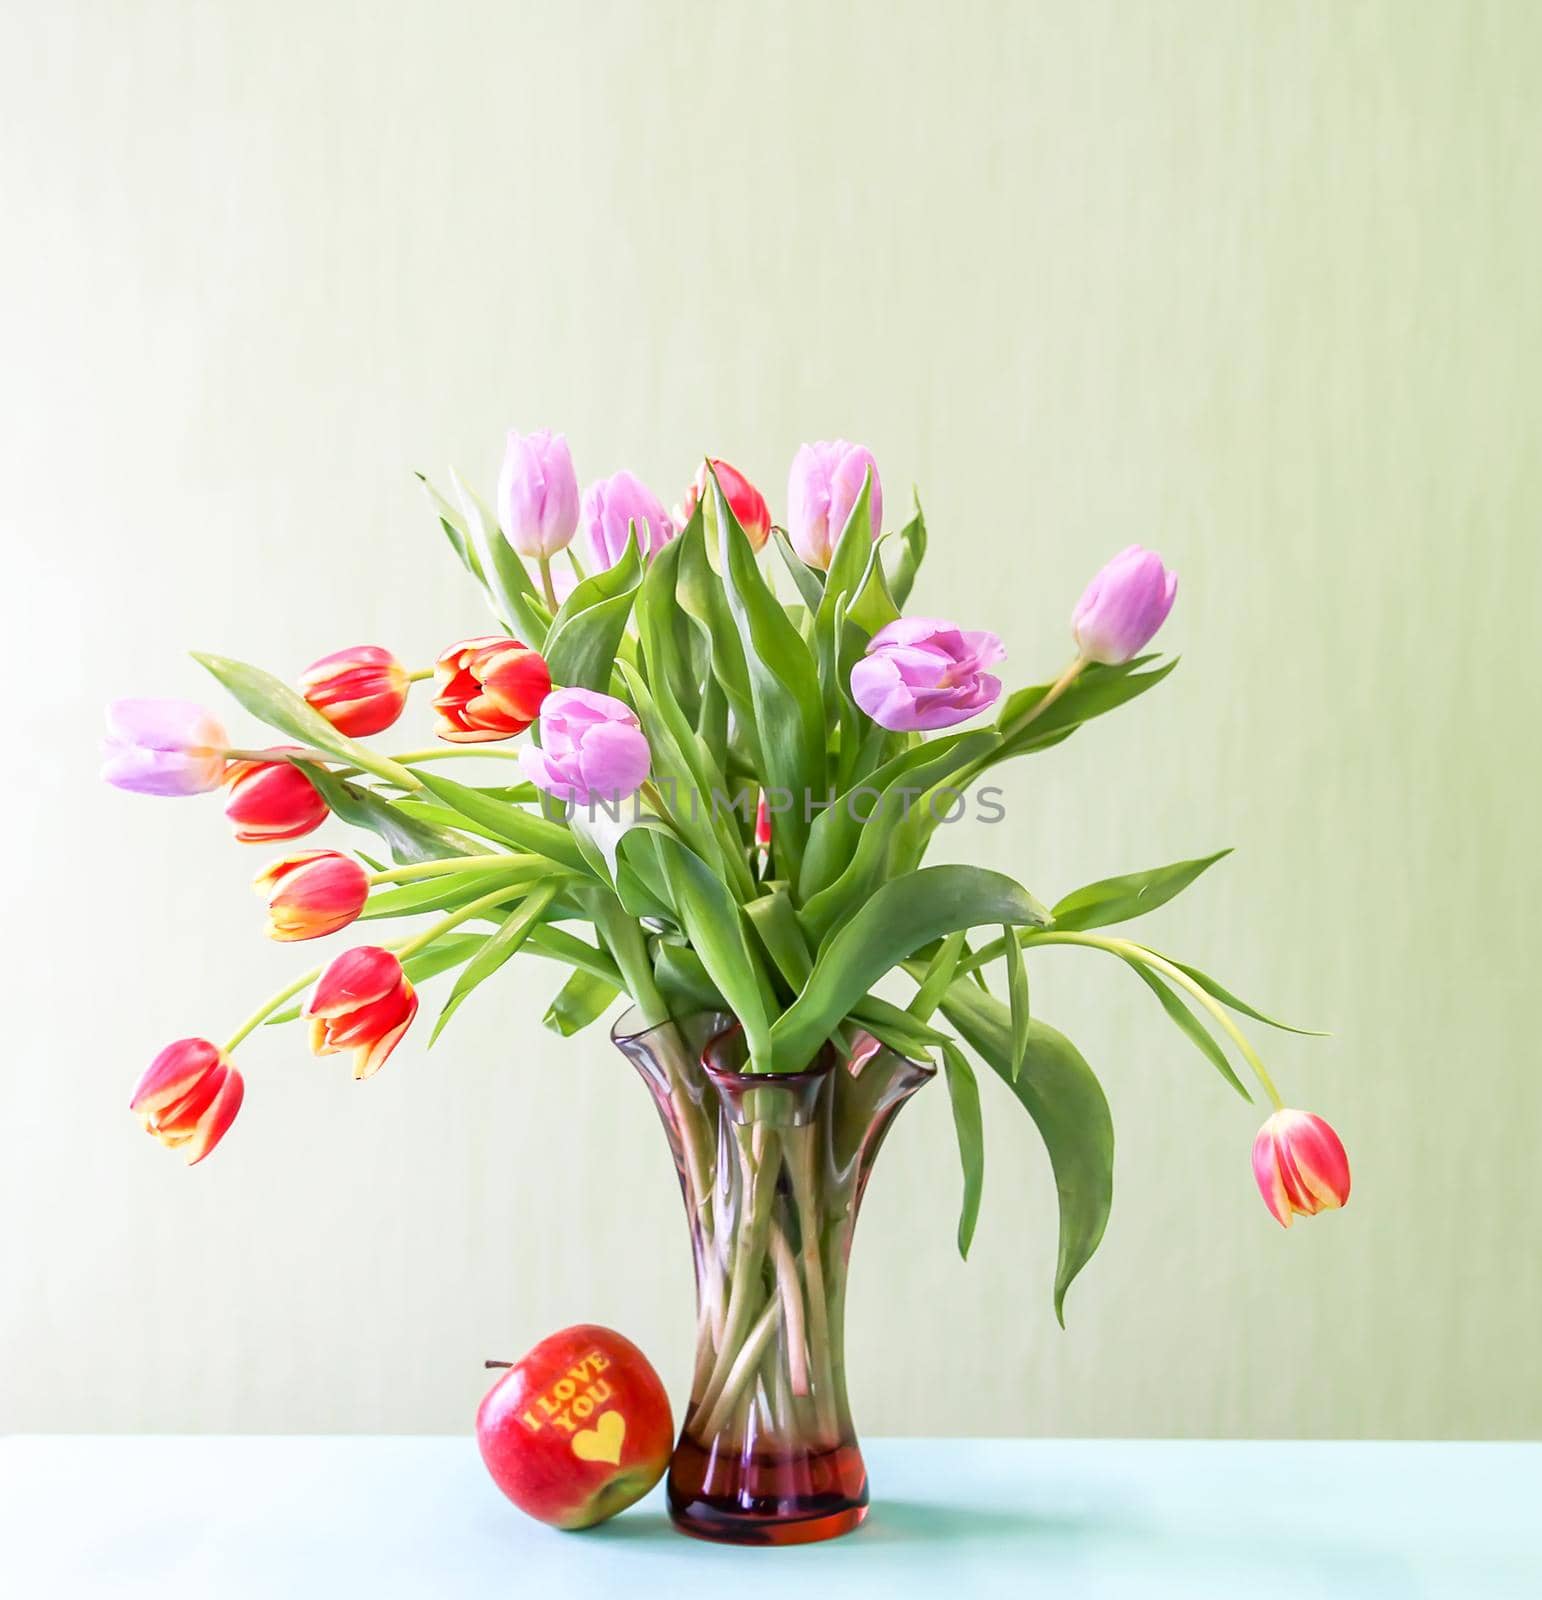 Bouquet of beautiful tulips by nightlyviolet